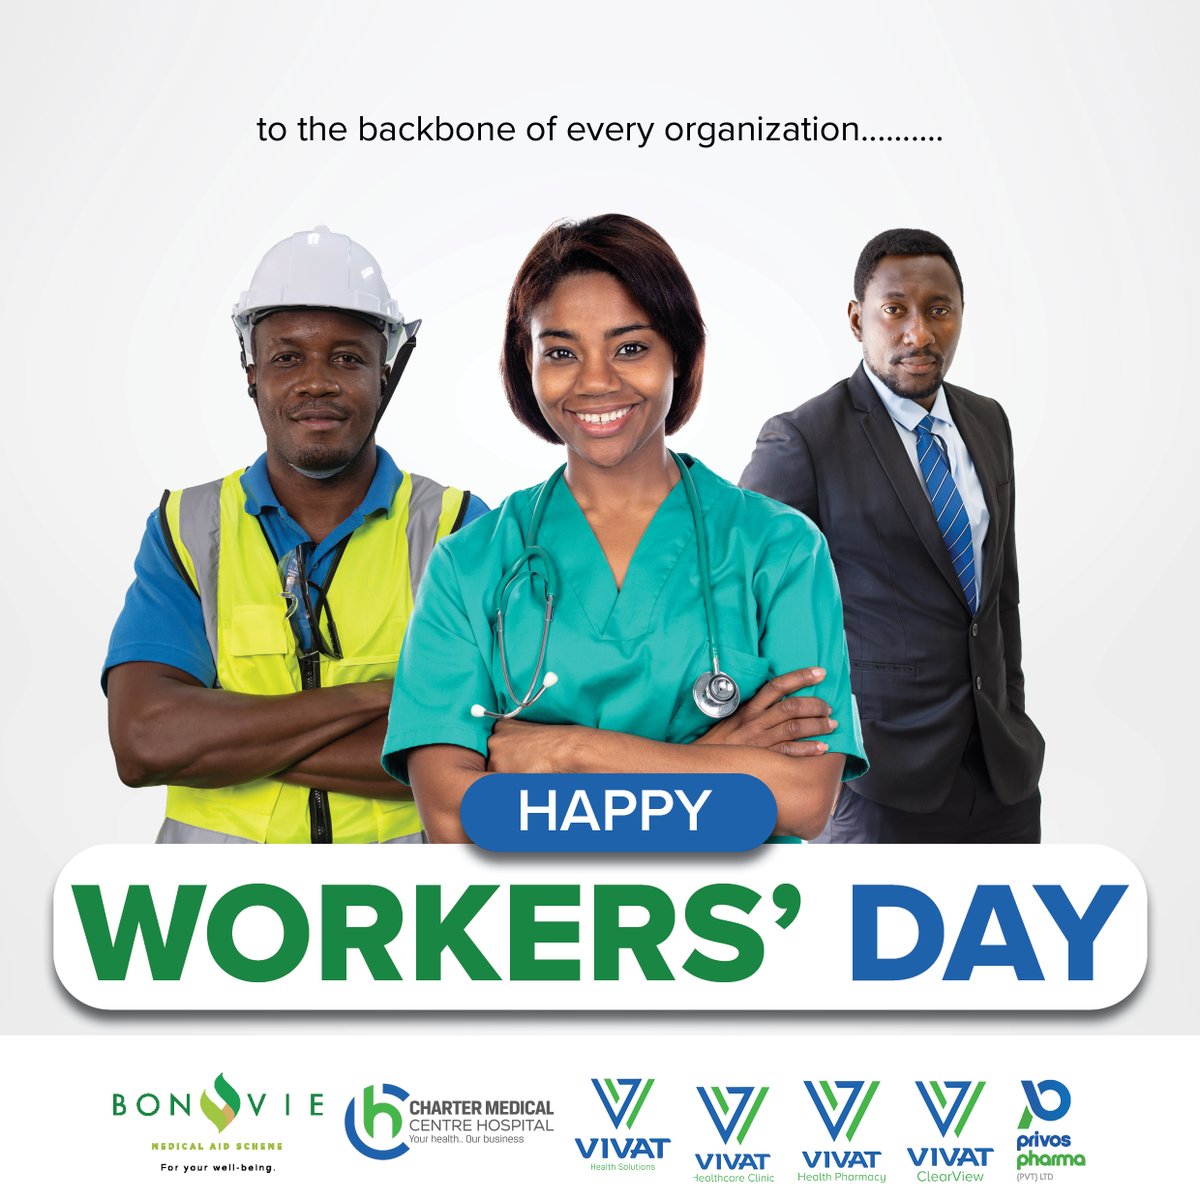 To the backbone of every organization! Happy Workers' Day.

#internationalwokersday #lworkersday
#livehealthy #QualityHealthcareRedefined